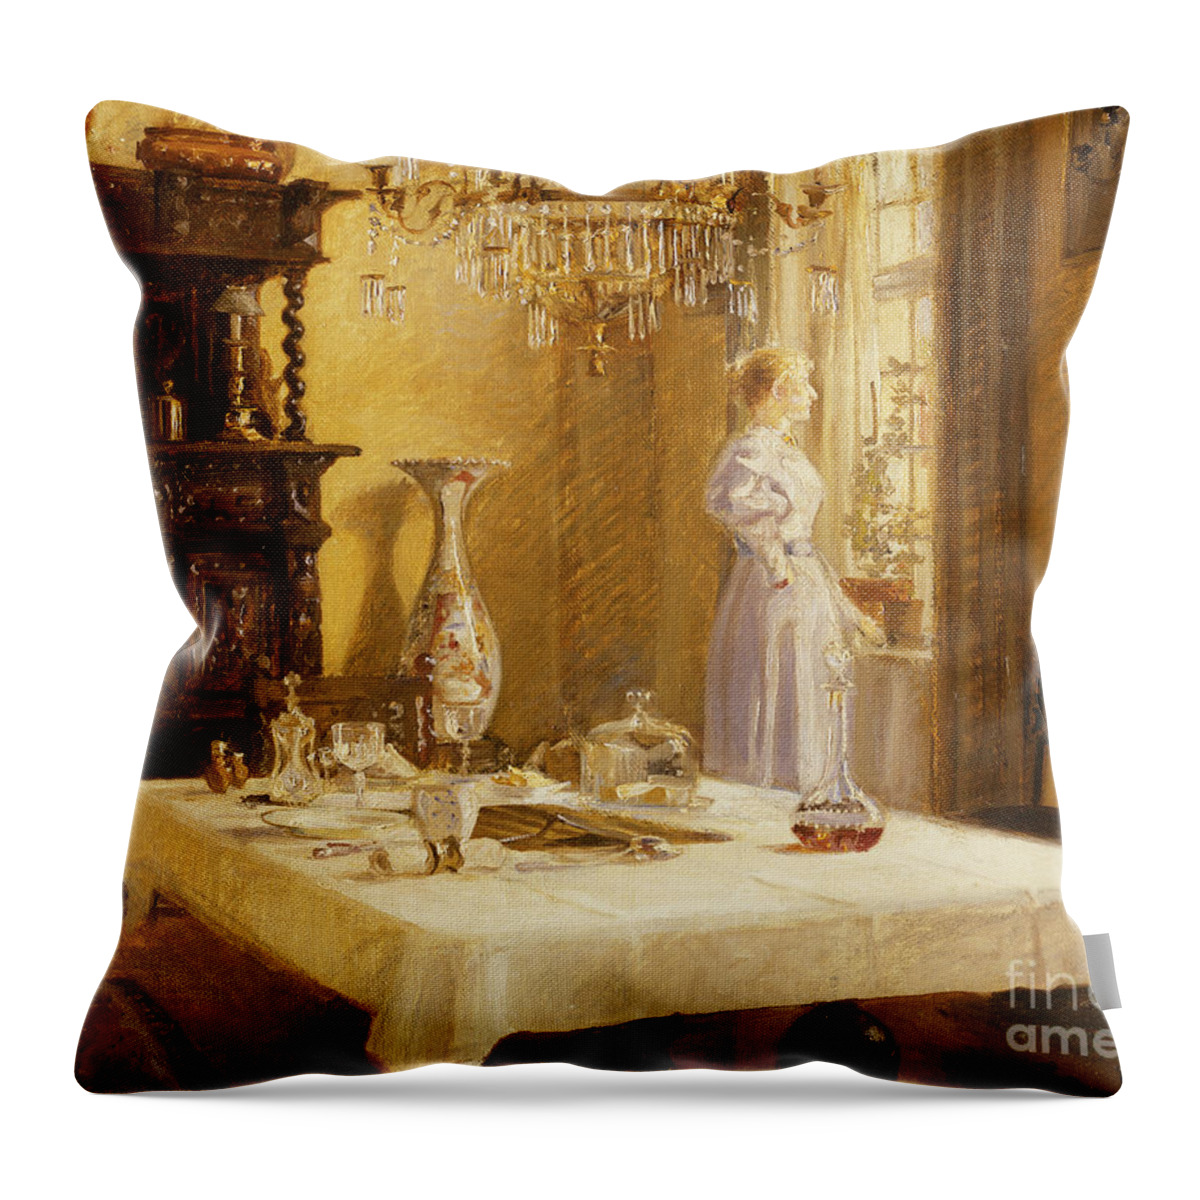 Bottle Throw Pillow featuring the painting The Late Arrival, 1894 by Hans Nikolaj Hansen